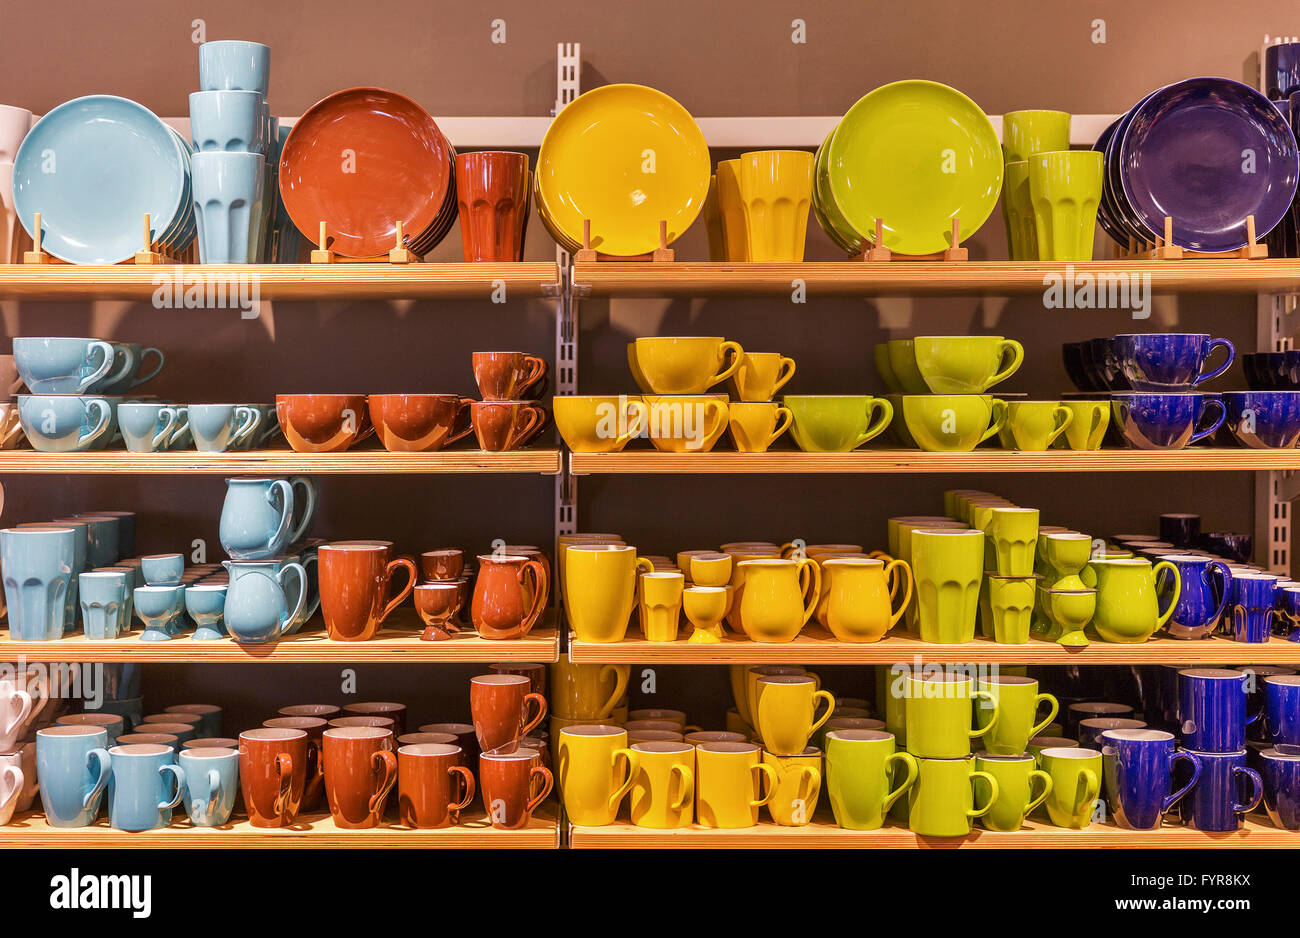 Retail display of multicolored porcelain dishes and mugs on the shelves. Stock Photo